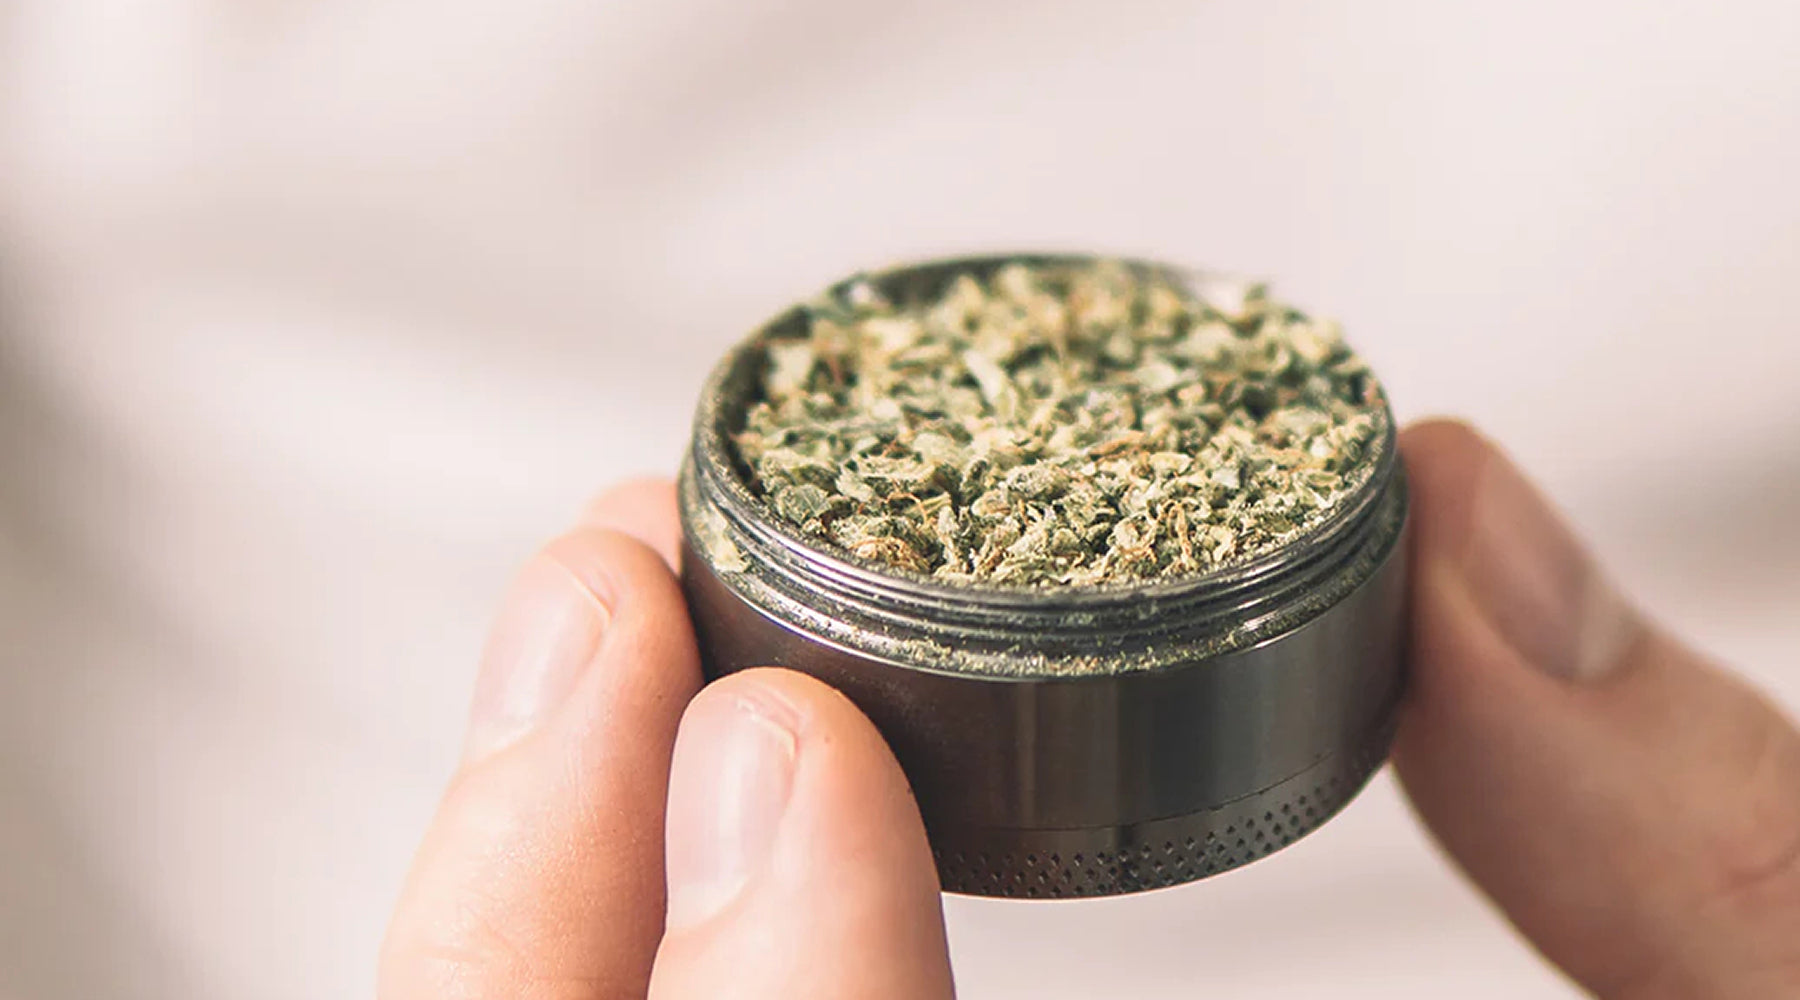 The Complete Guide to Cannabis Grinders